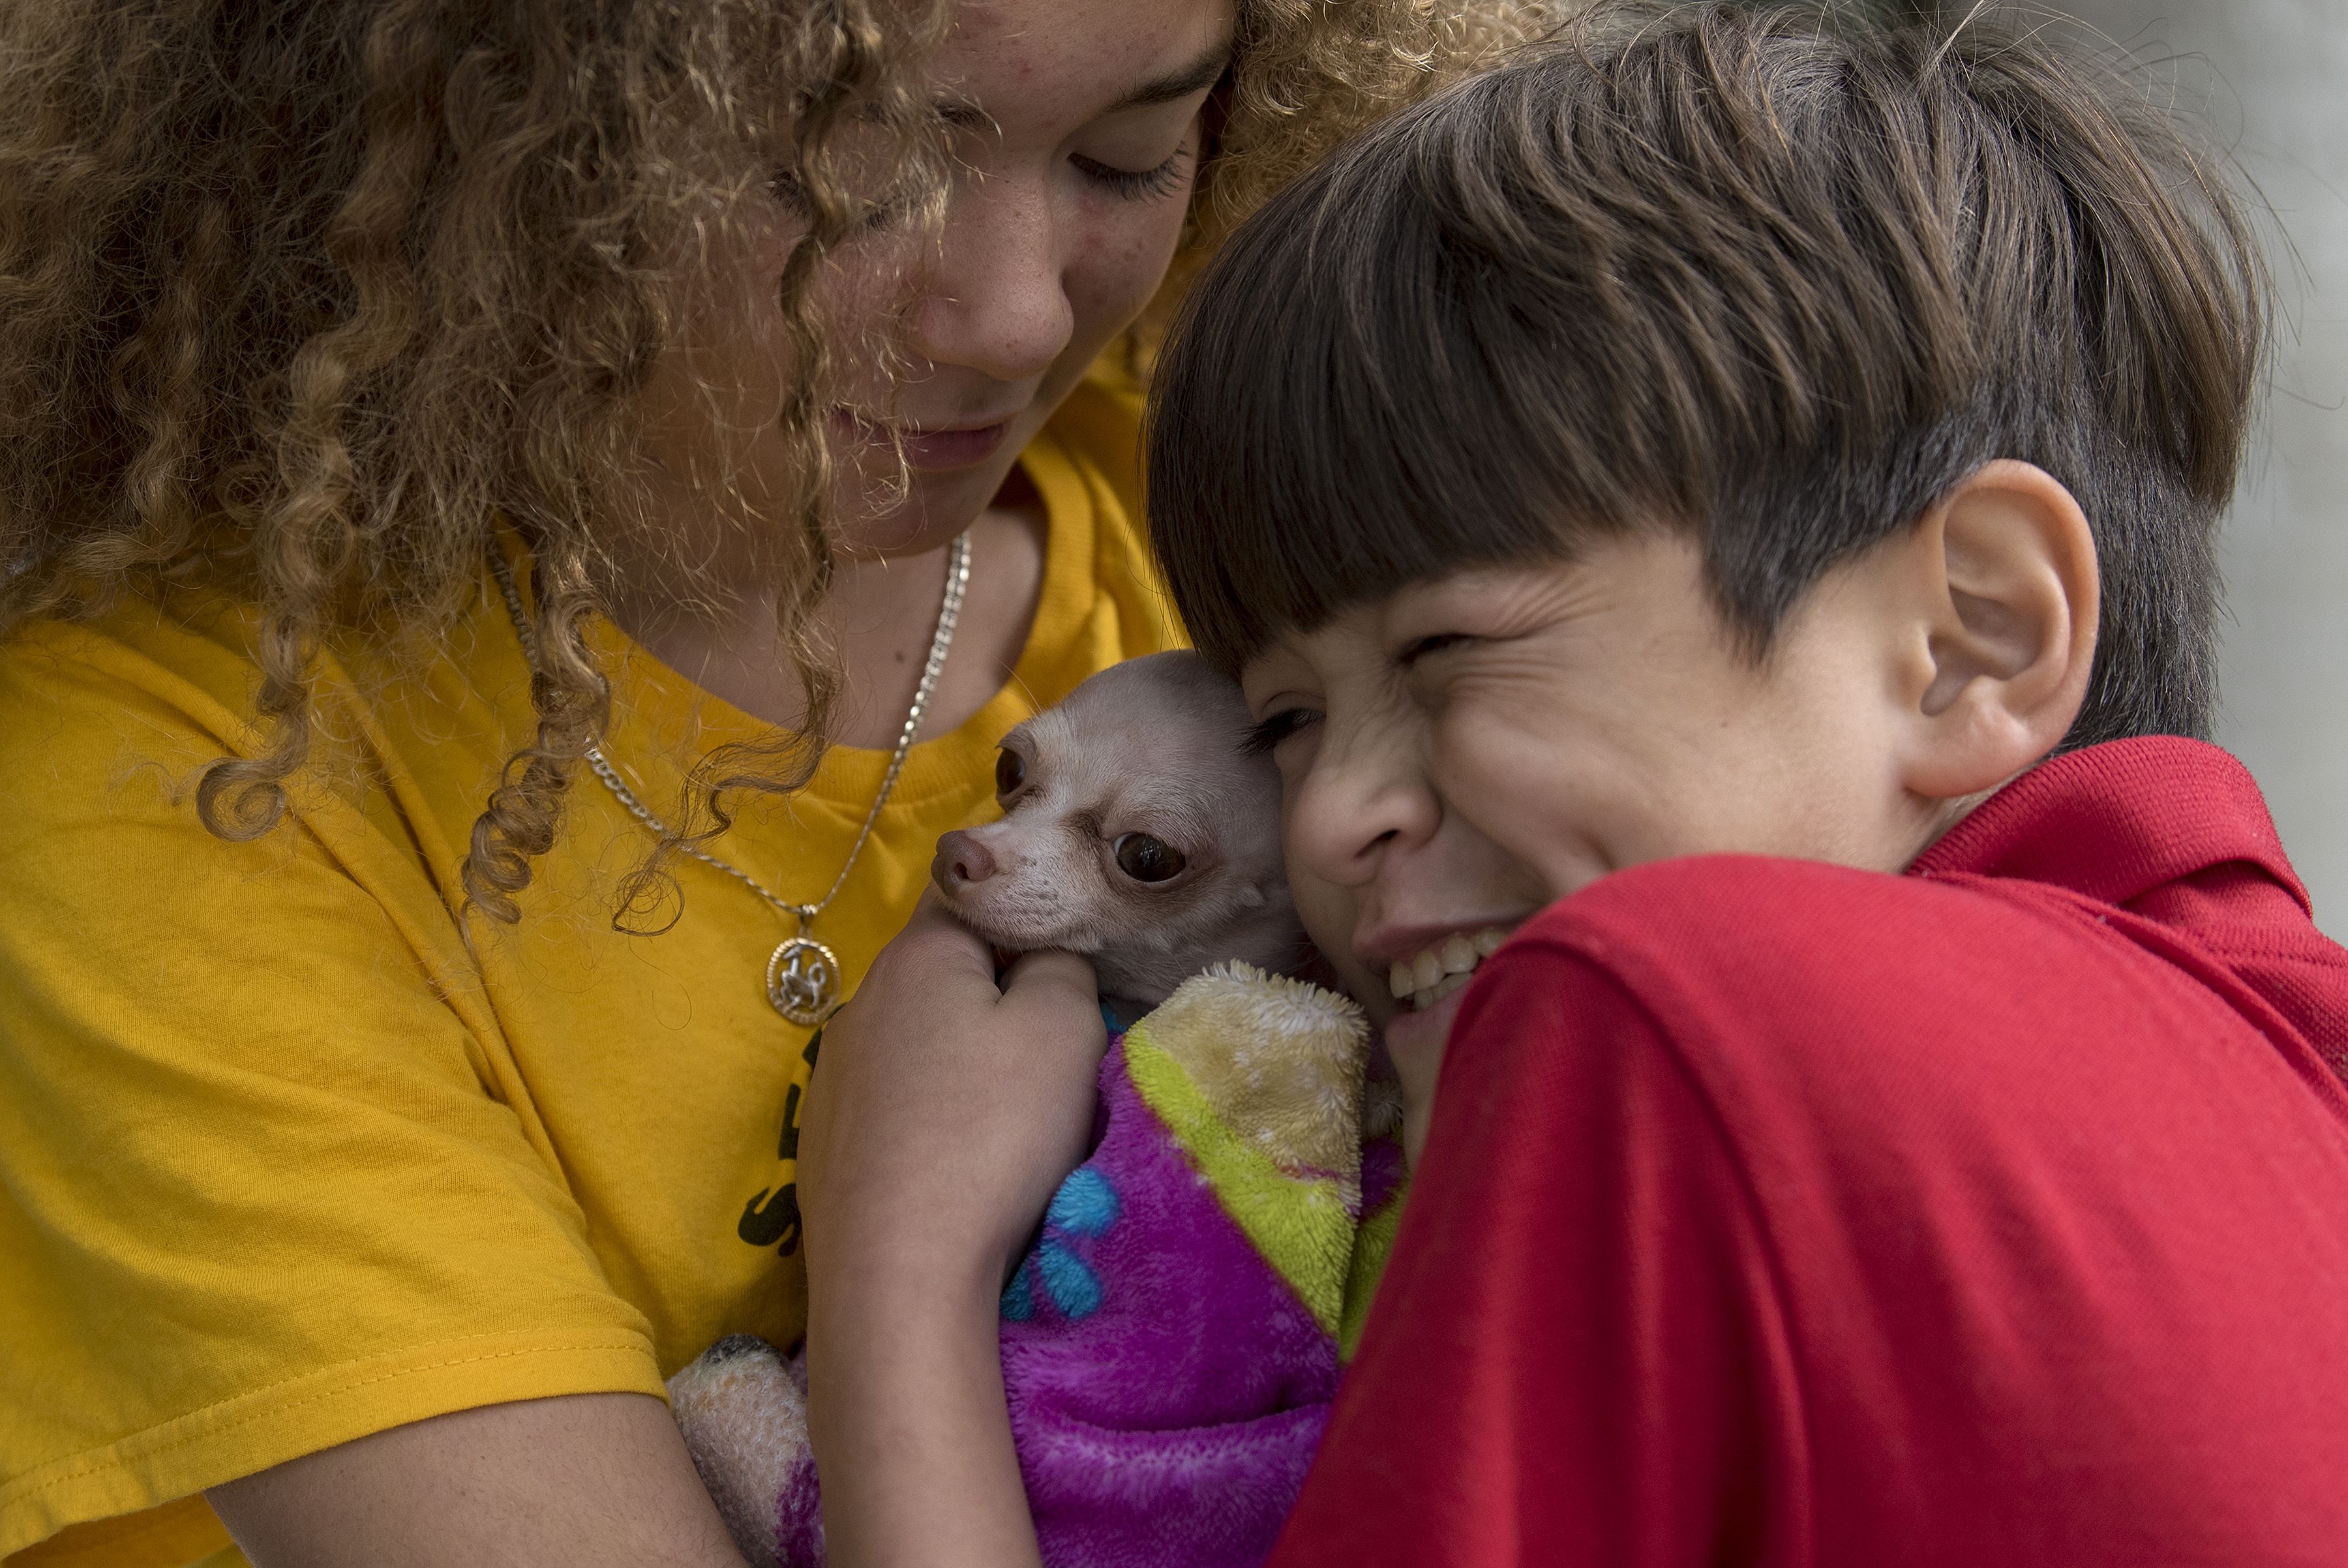 Kennedy Flores and her brother, Edward, cuddle with family dog, Bambi, as they visit their father for the Thanksgiving holiday in Tijuana, Mexico. Image by Amanda Cowan. Mexico, 2019.